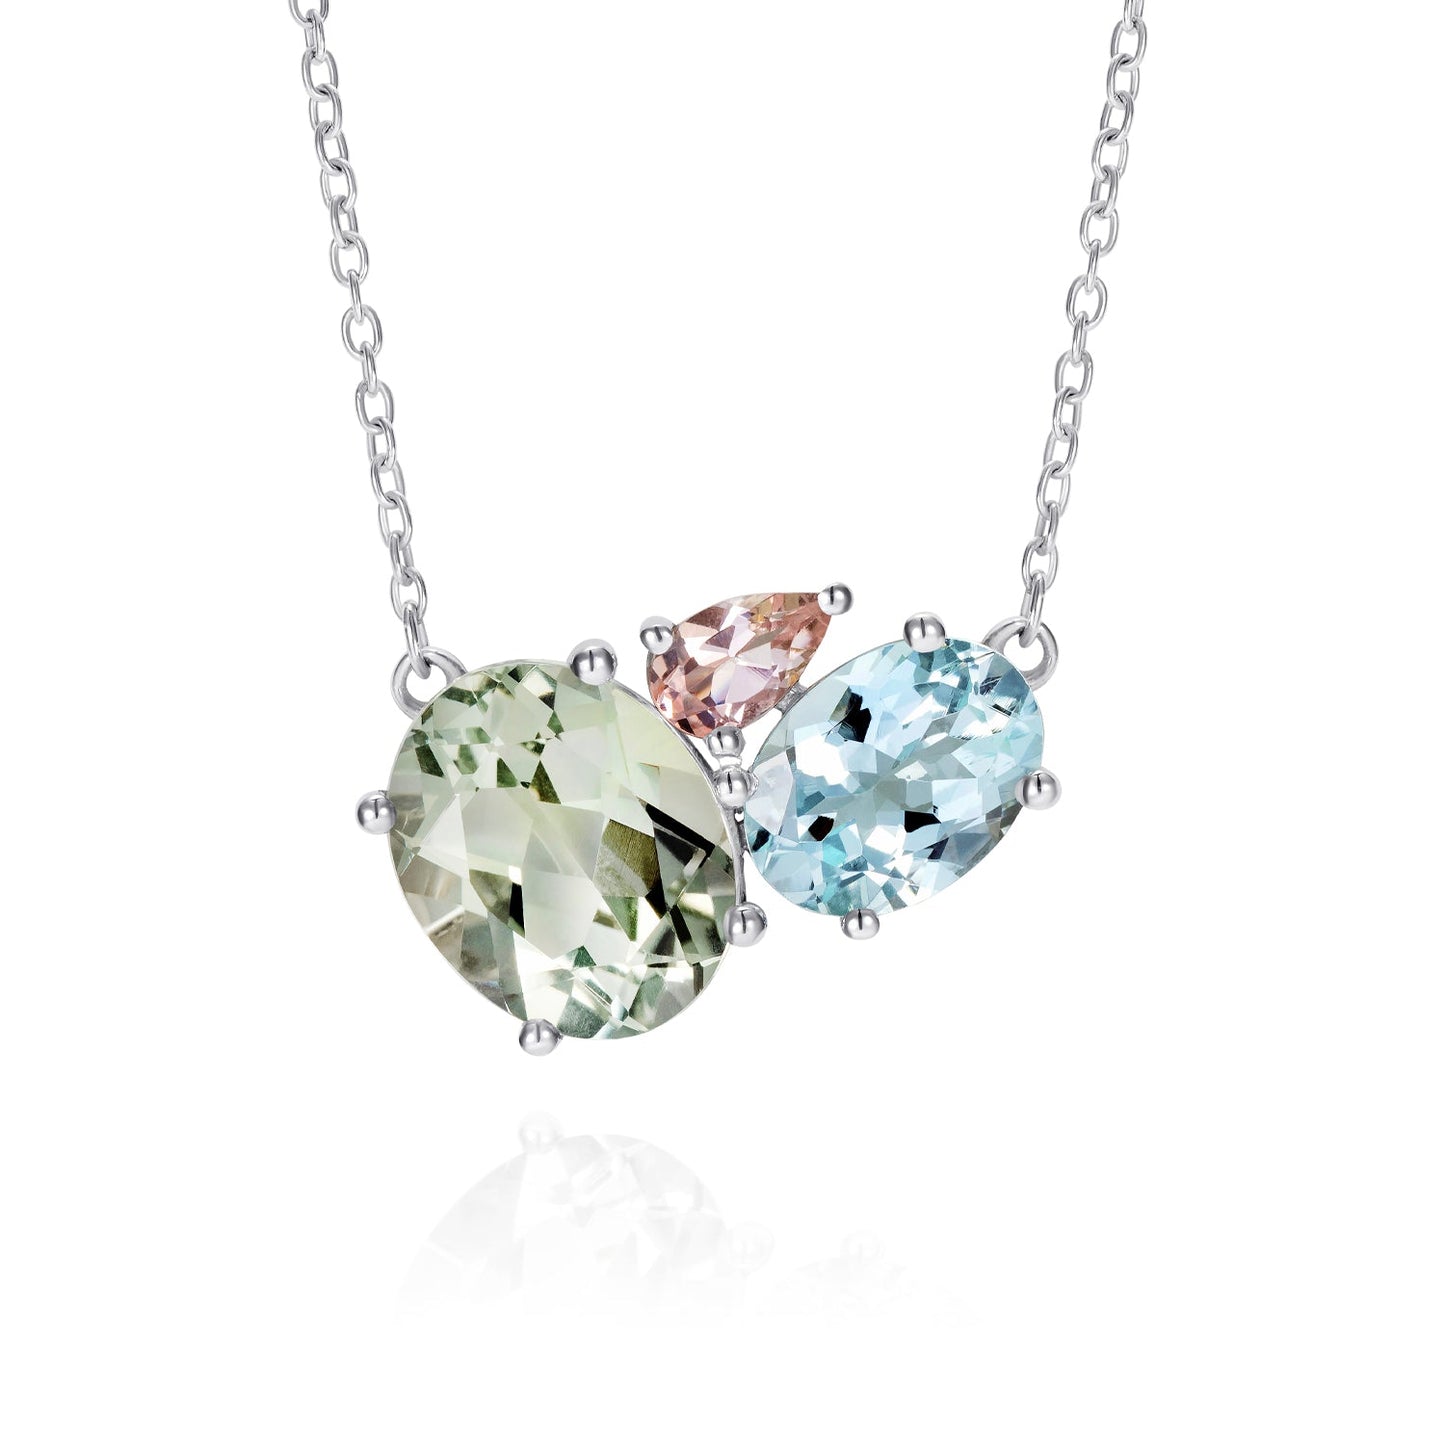 Load image into Gallery viewer, British Jewellers designed London-made custom silver jewellery - Green Amethyst Silver Cluster Necklace with Aquamarine and Morganite – Como Collection, Augustine Jewellery, British Jewellers, Gemstone Jewellery, Luxury Jewellery London.
